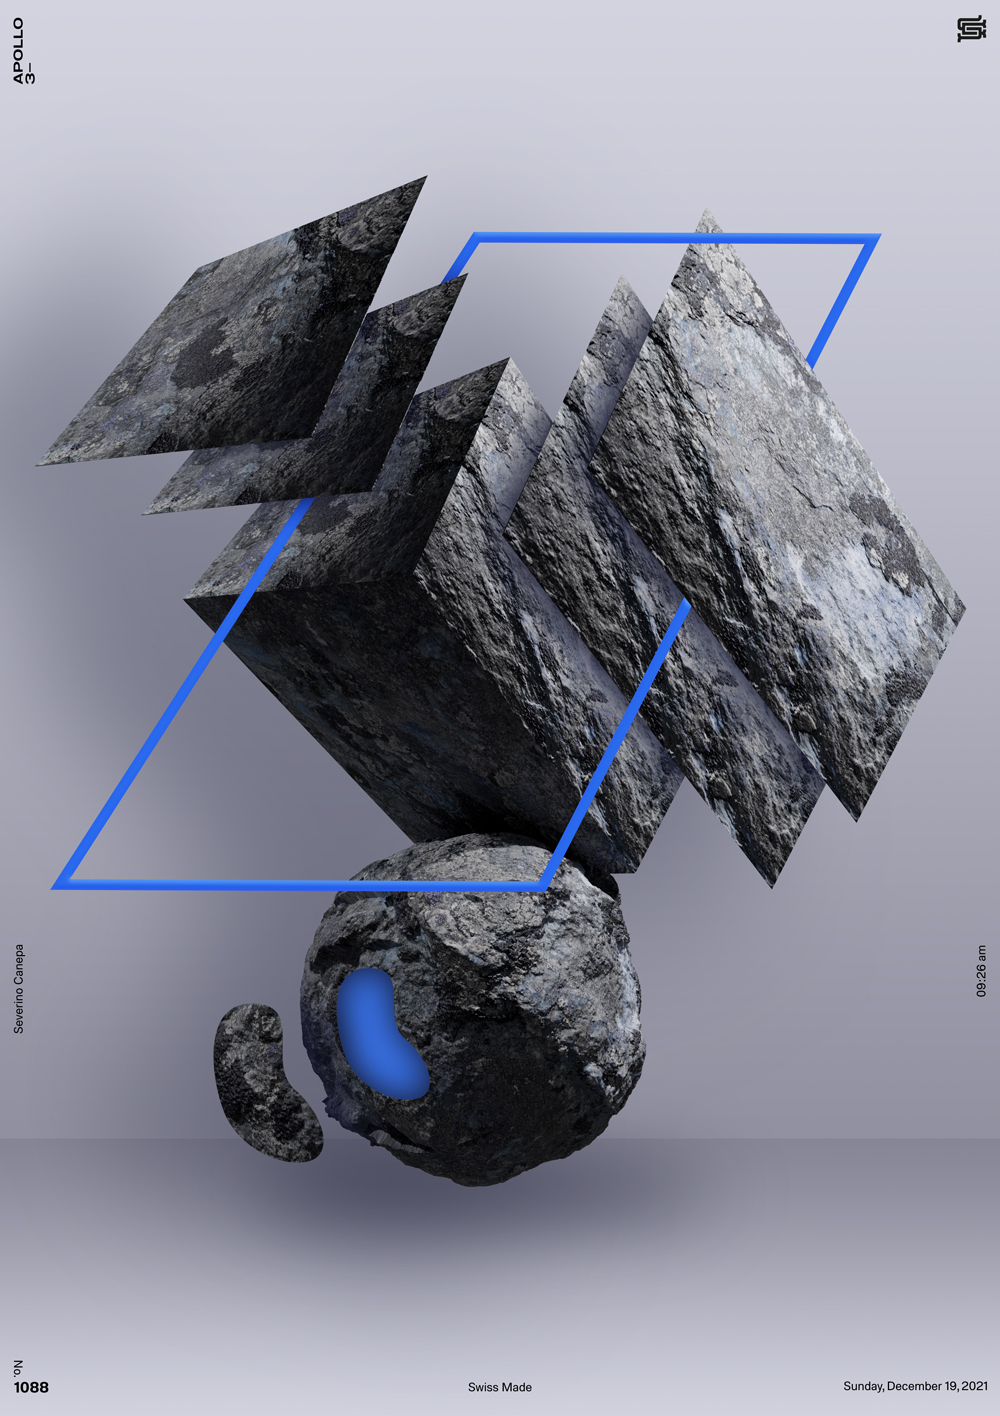 Intriguing and minimalist digital creation realized with 3D rocks